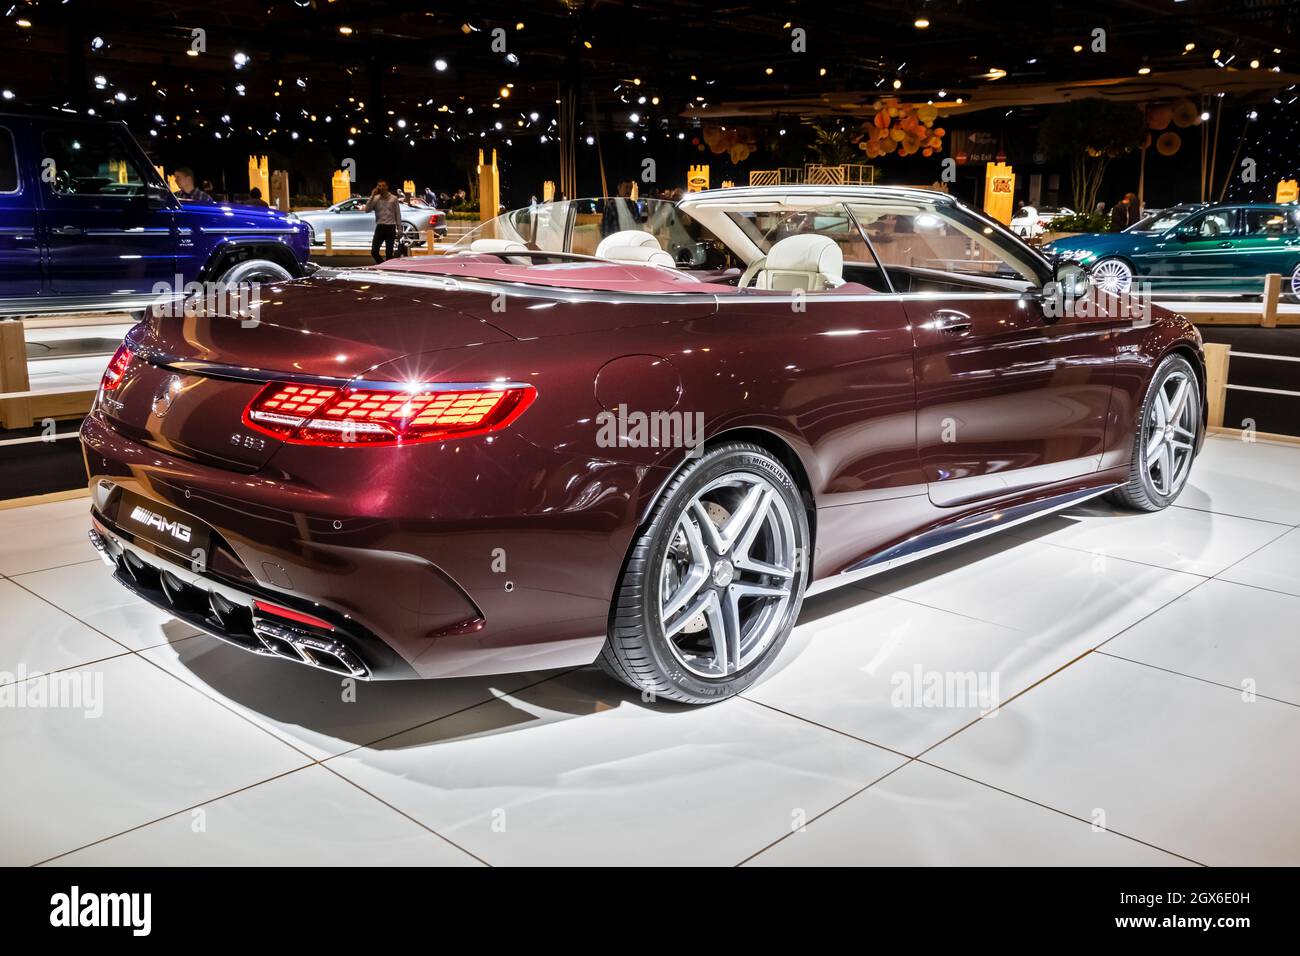 Mercedes-AMG S63 Cabriolet sports car showcased at the Autosalon 2020 Motor Show. Brussels, Belgium - January 9, 2020. Stock Photo